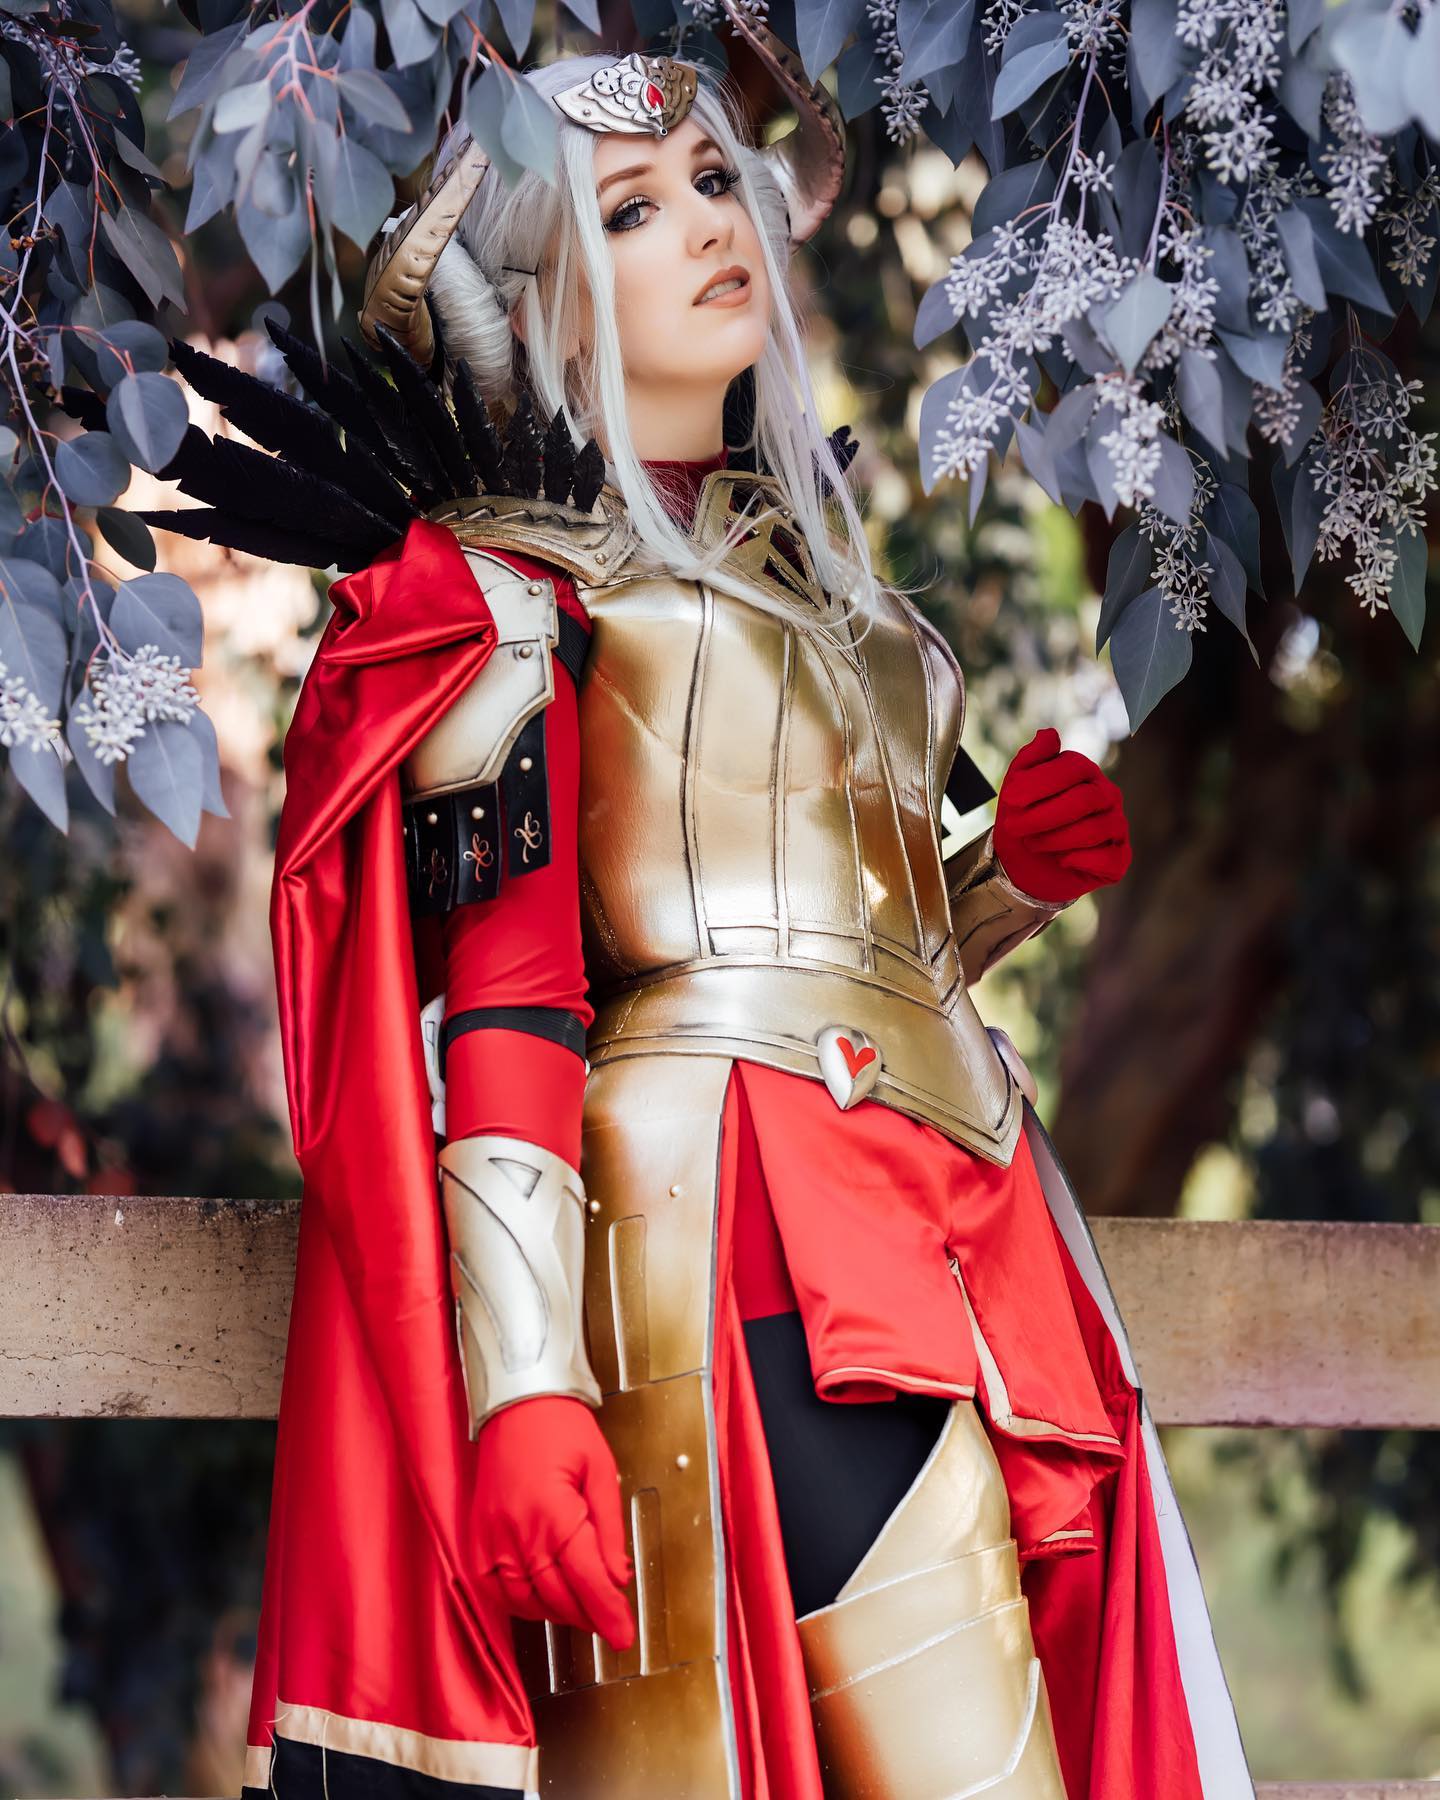 Edelgard from Fire Emblem Costume - Coscove